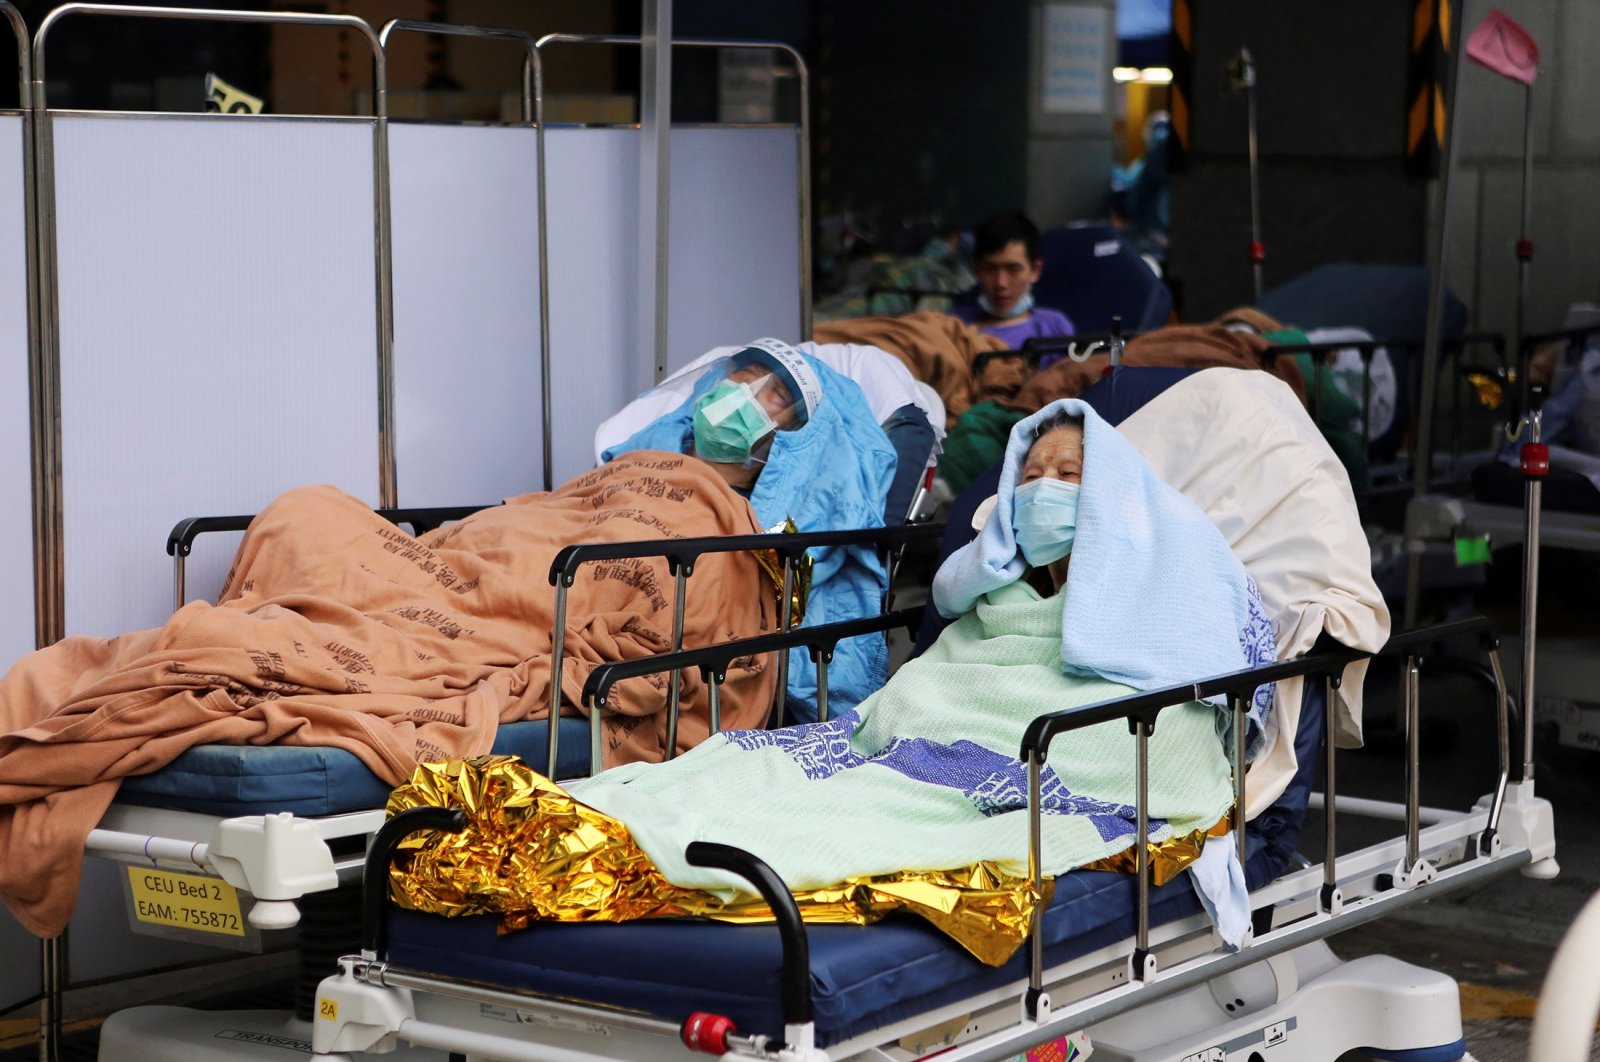 A 98-year-old patient who tested positive for the omicron variant of COVID-19, lies on a hospital bed outside the emergency ward of Caritas Medical Center in Hong Kong, China, Feb. 17, 2022. (Reuters Photo)